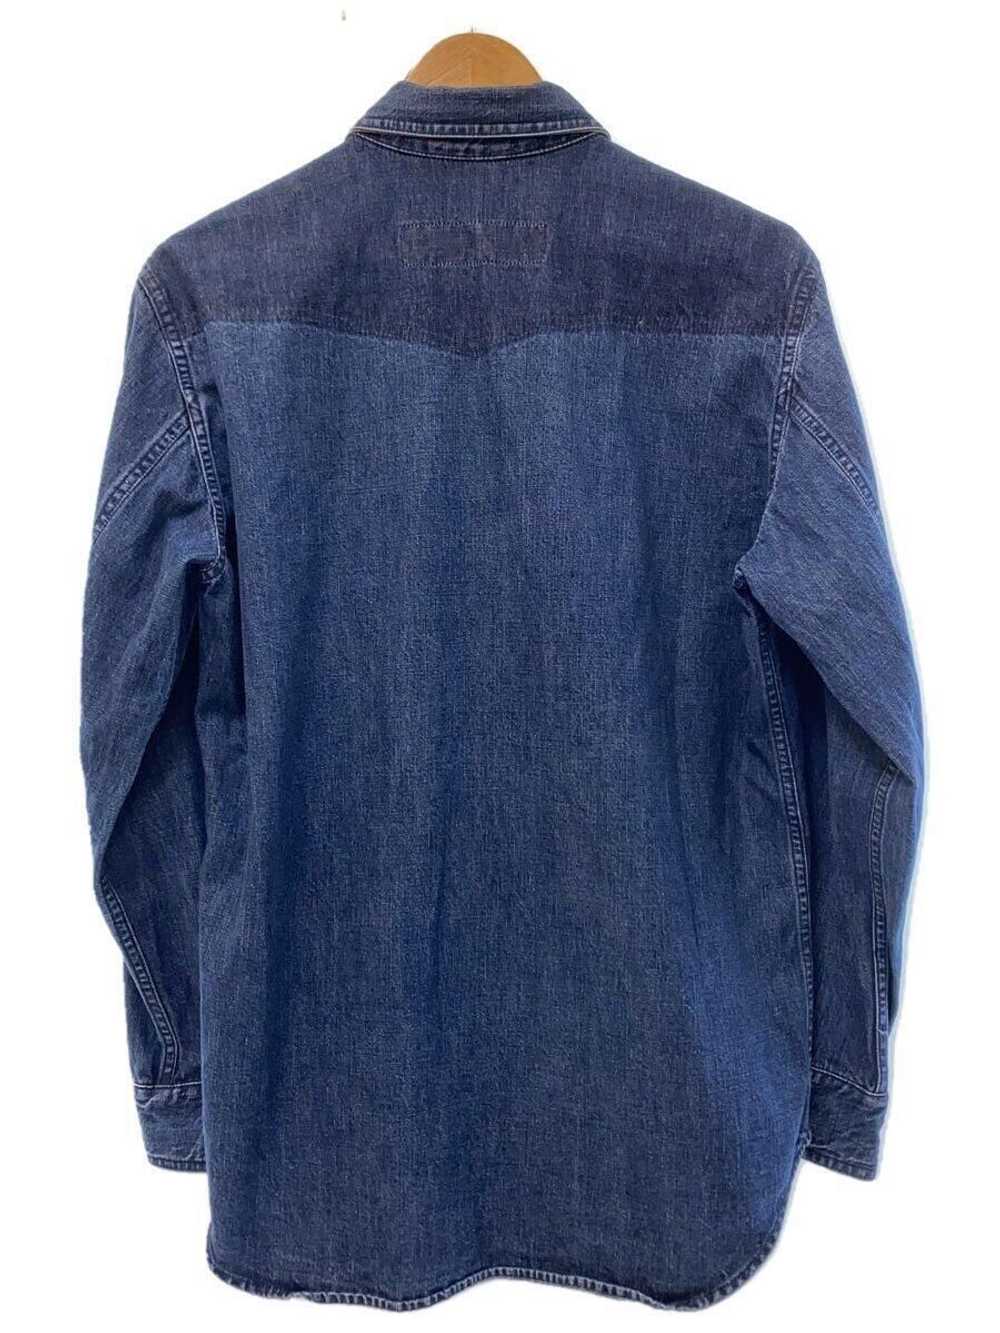 Undercover SS99 "Relief" DDenim Shirt - image 2